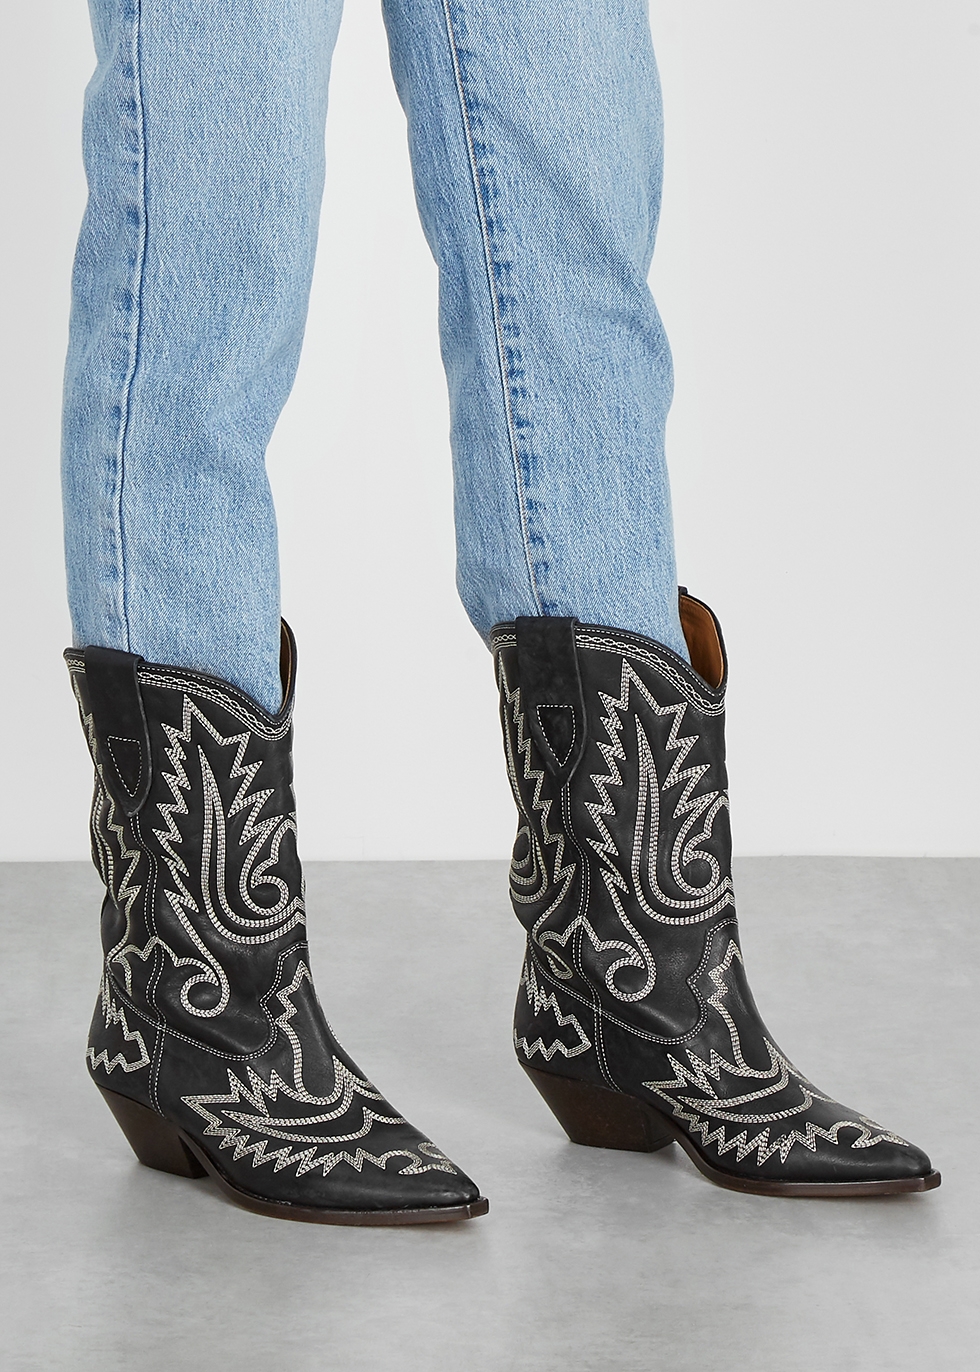 buffalo boots outfit